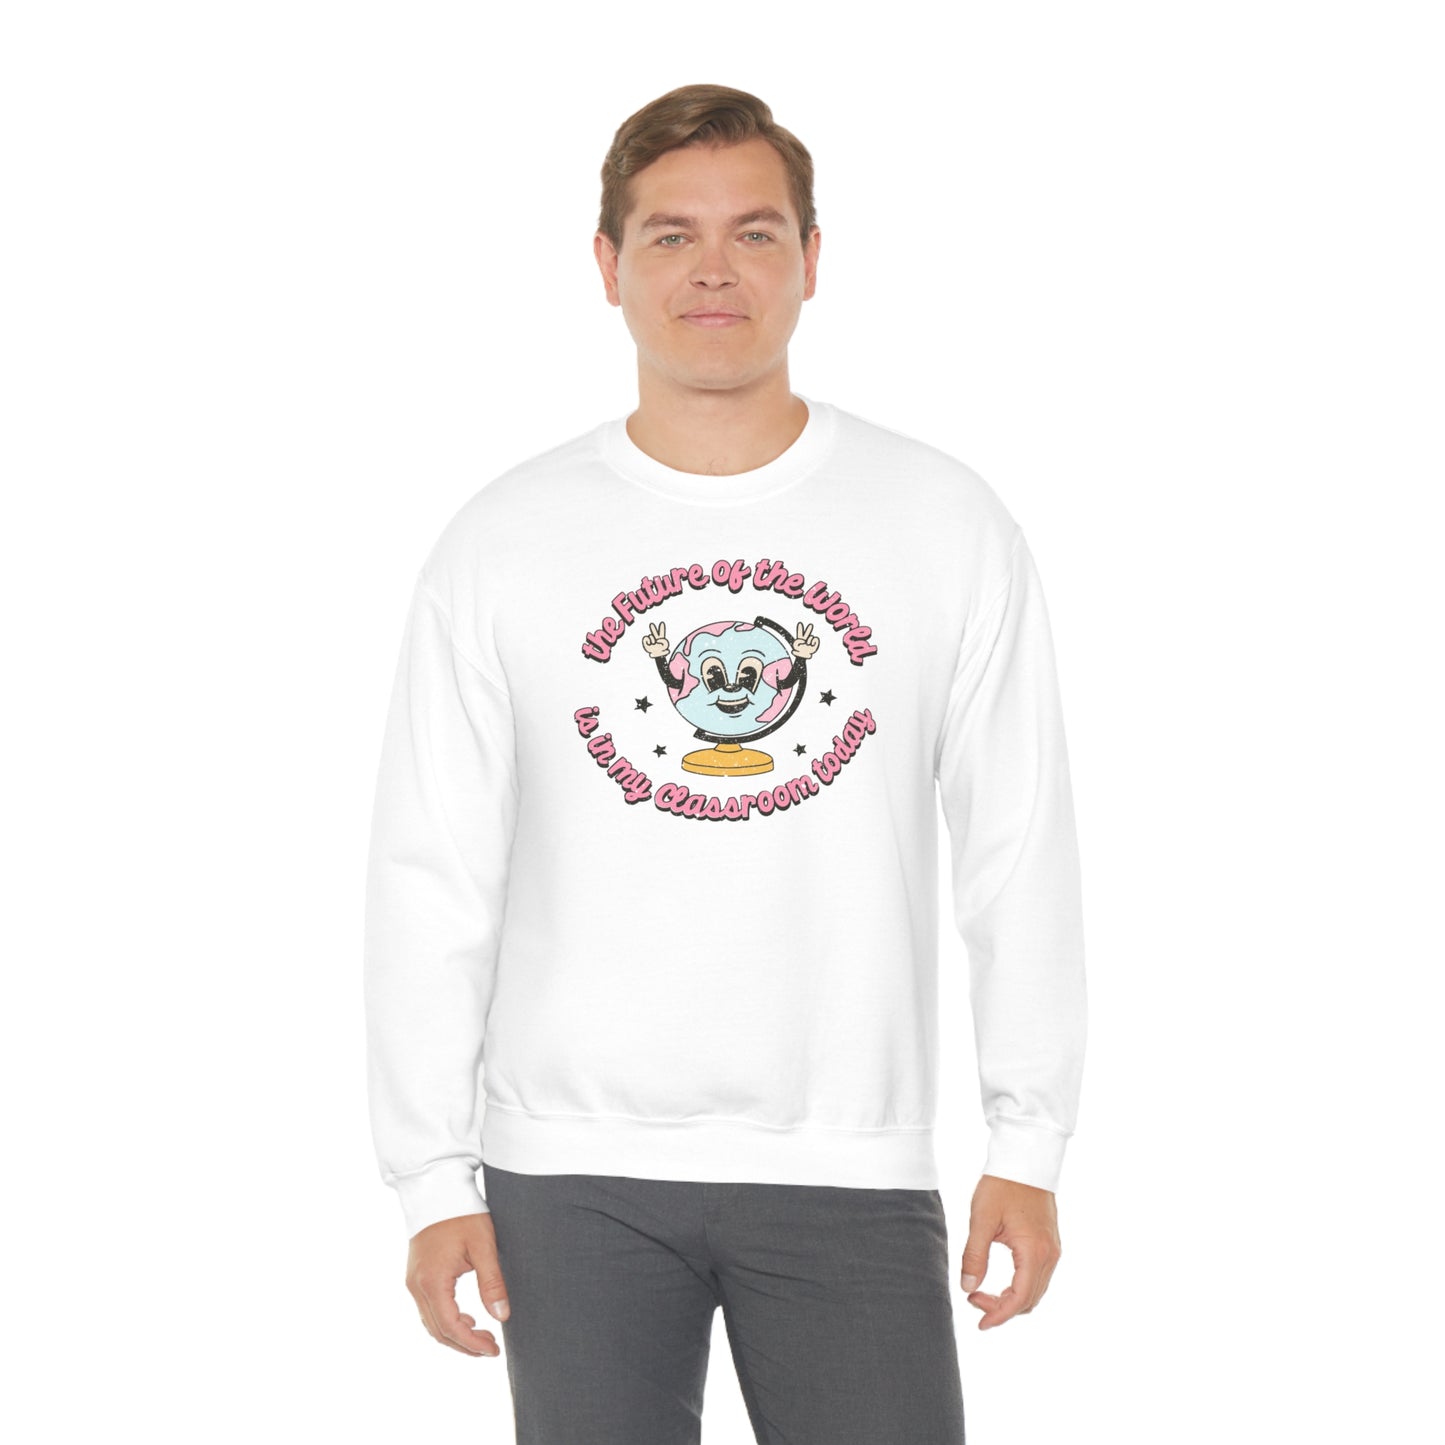 "The Future of the World is in My Classroom Today" - Unisex Heavy Blend™ Crewneck Sweatshirt